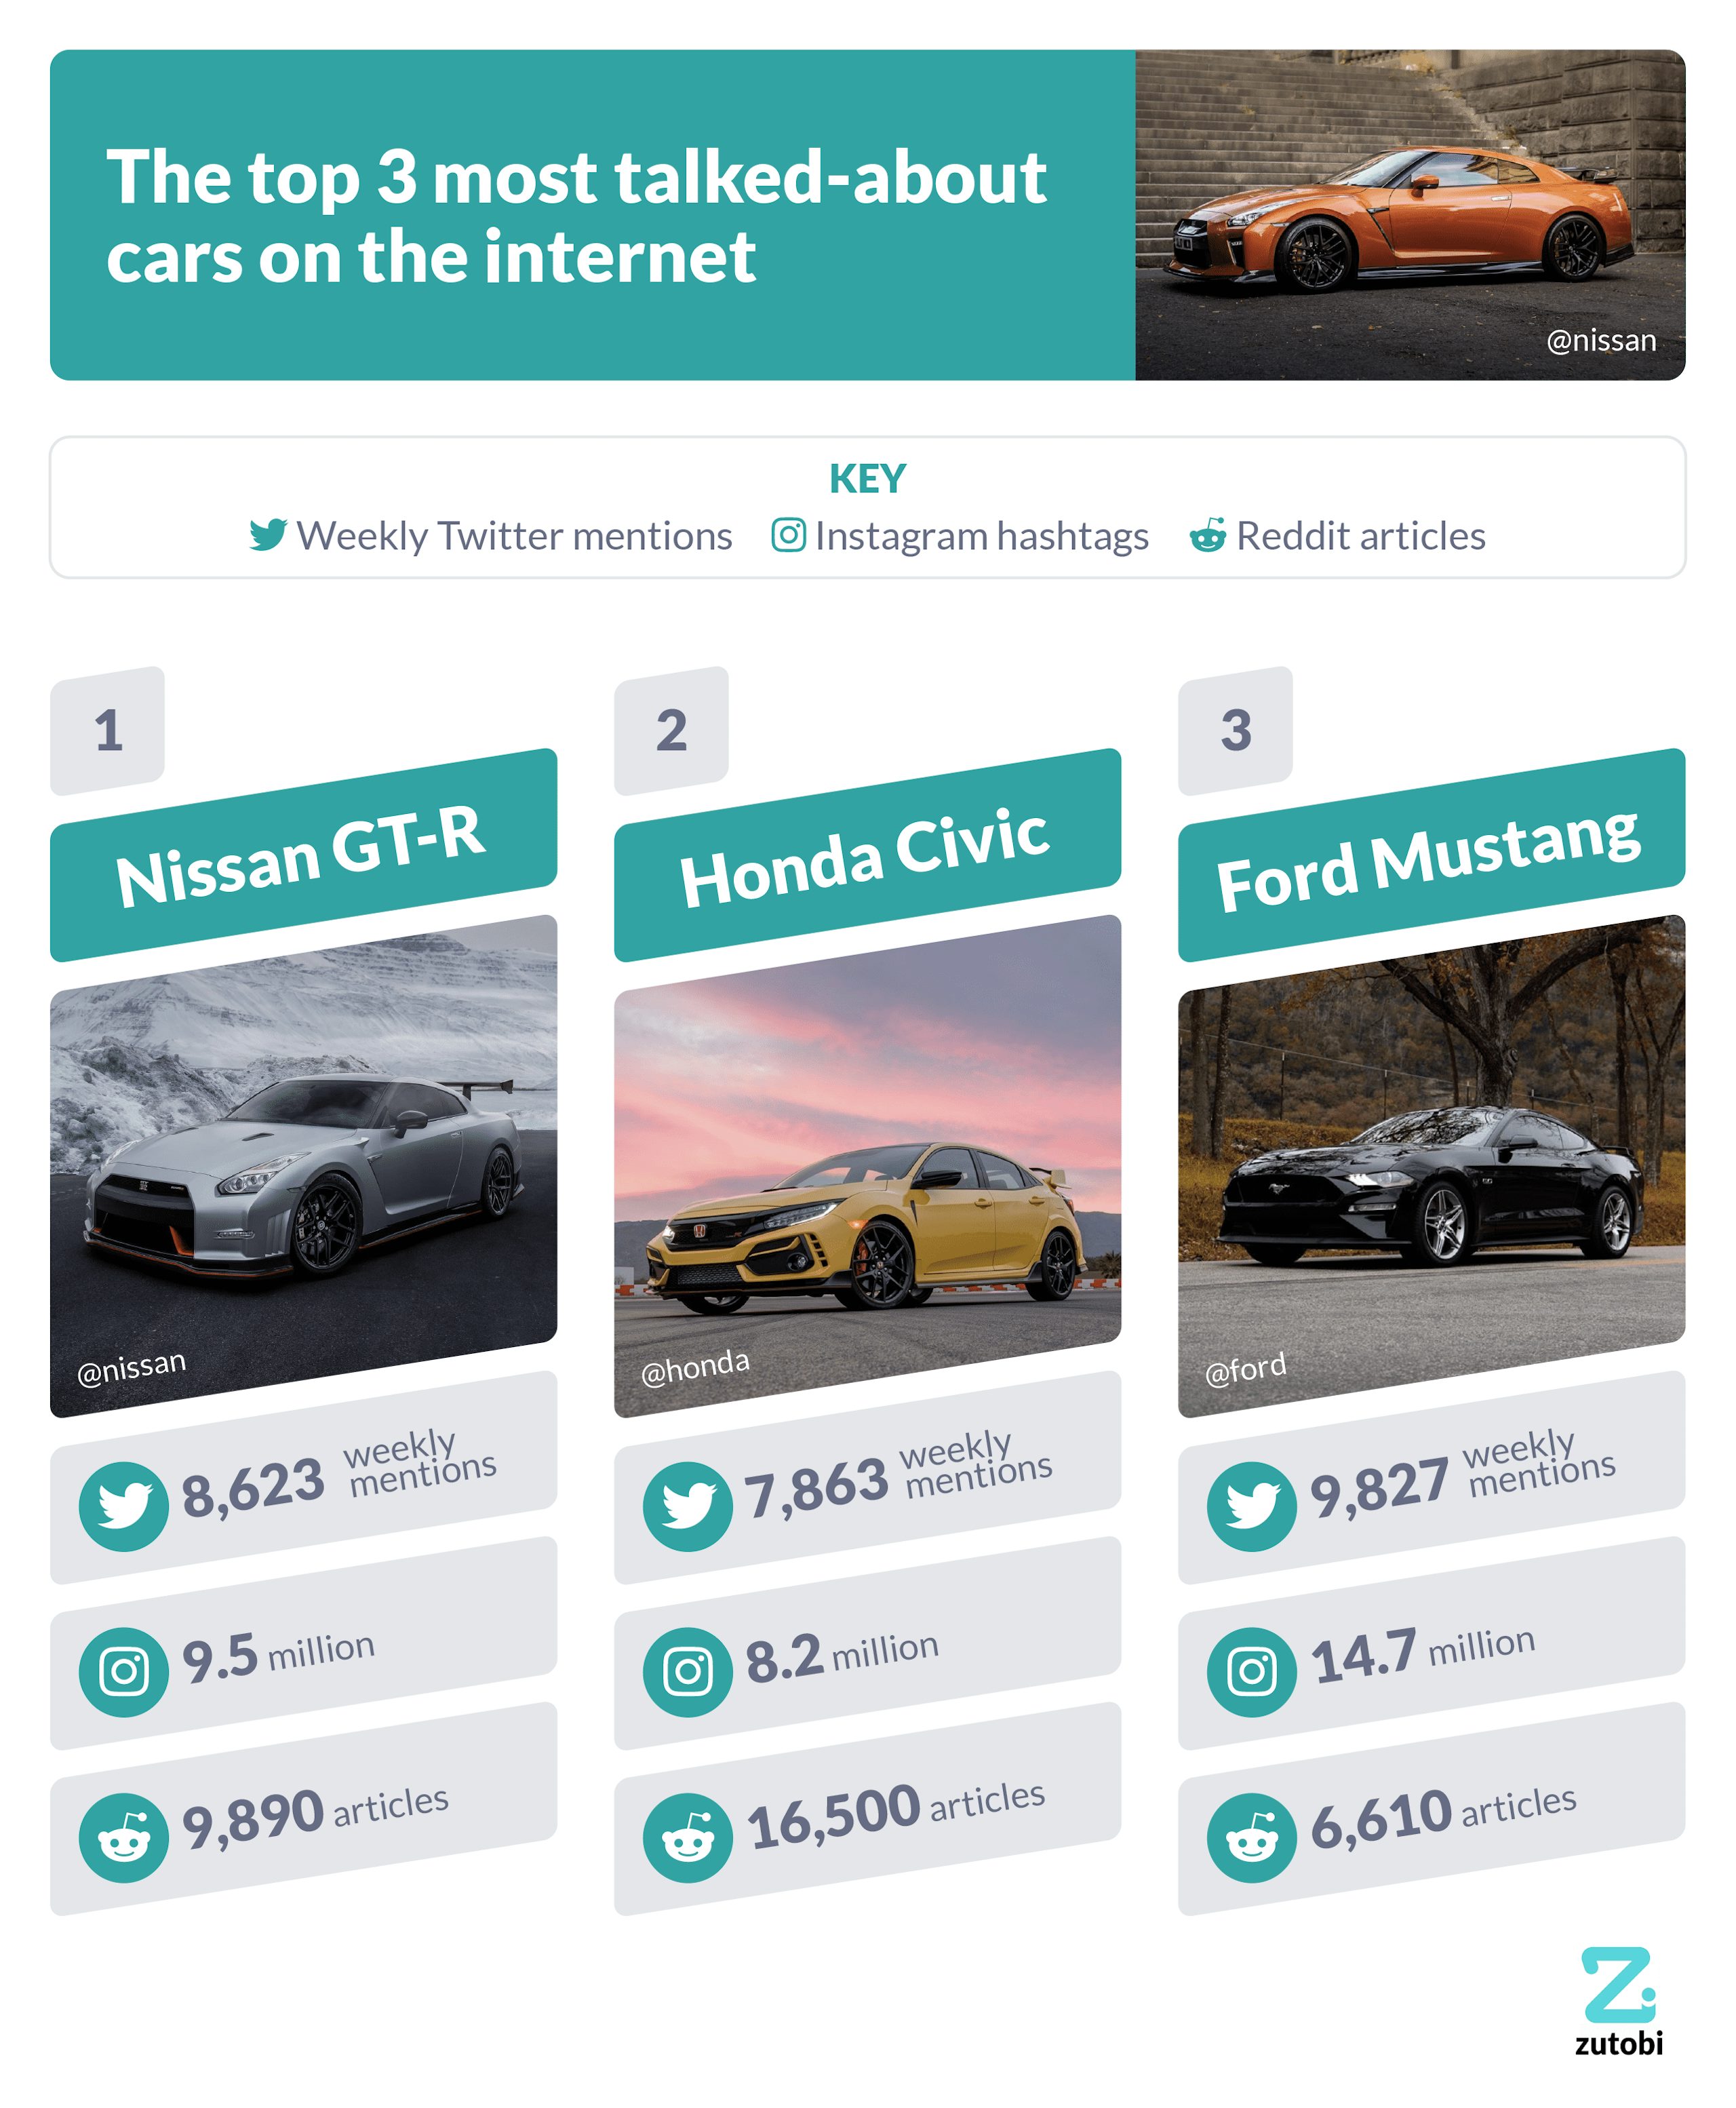 The most talked-about cars on the internet